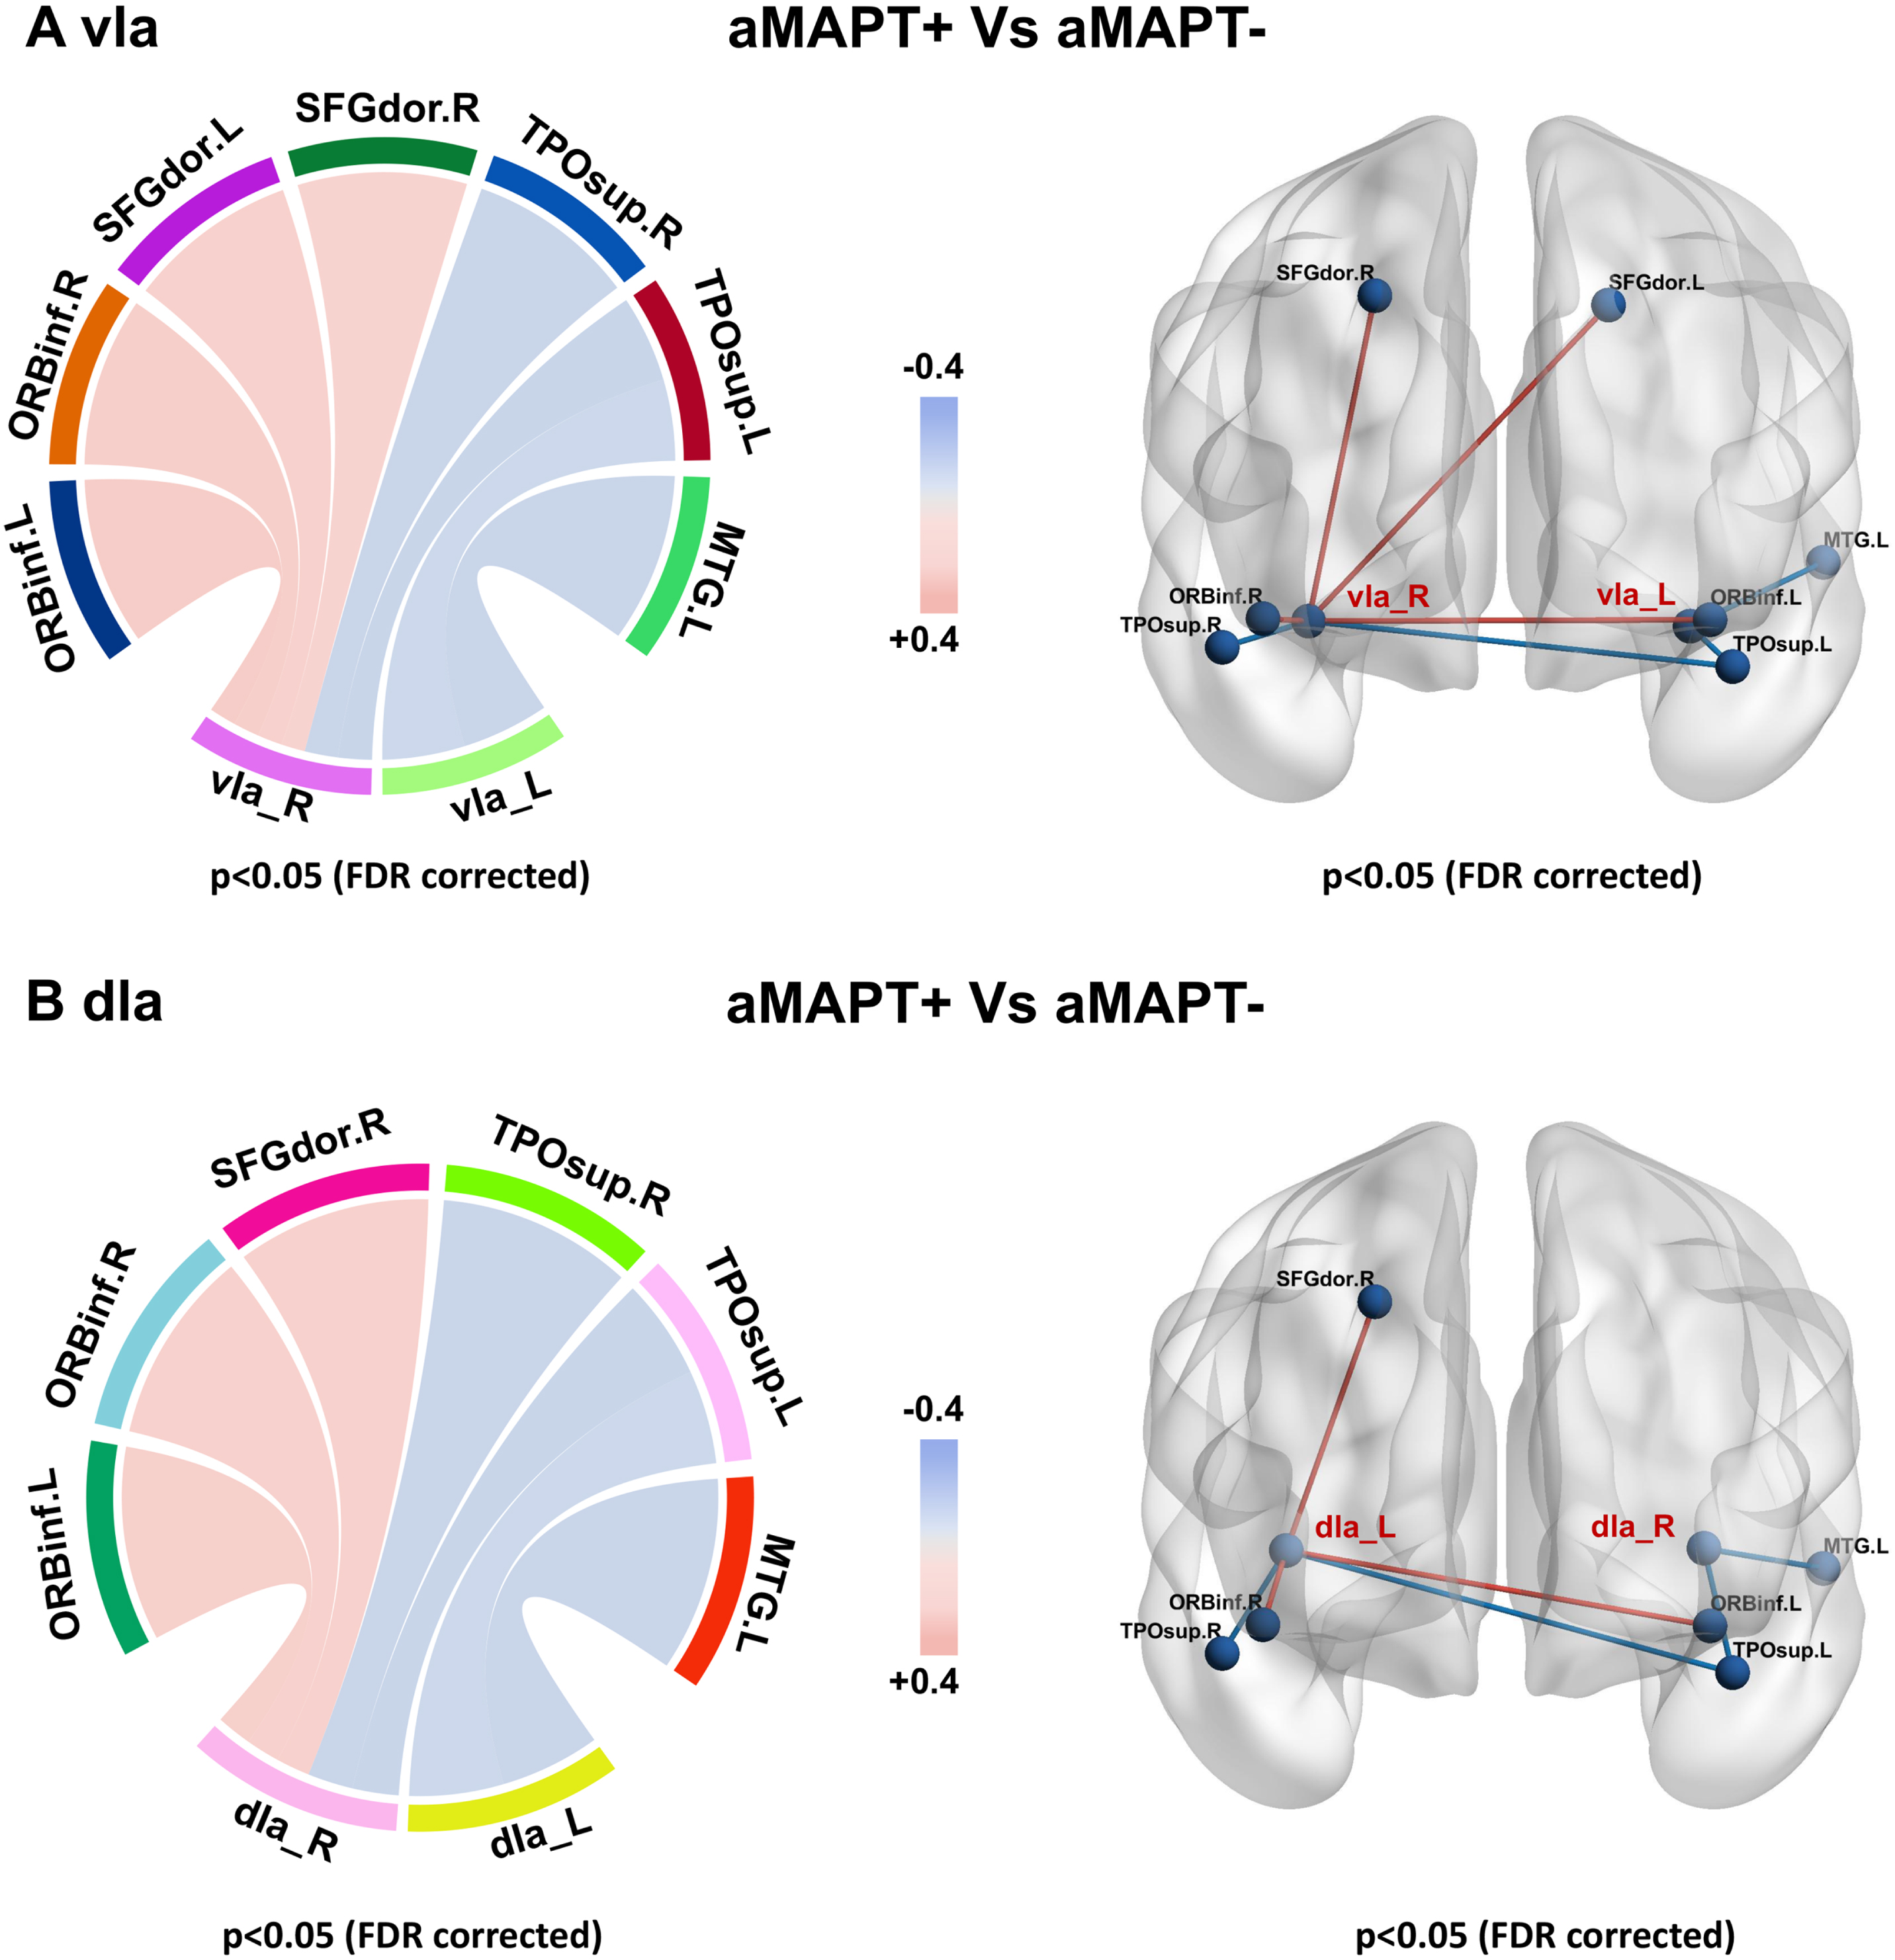 Sub-insula metabolic network in aMAPT+ and aMAPT– groups. In the comparison of the sub-insula metabolic network between aMAPT+ and aMAPT– subjects, the left vIa showed weakened connections with left medial temporal gyrus and left superior temporal pole, whereas the right vIa showed weakened connections with bilateral superior temporal pole and enhanced connectivity with bilateral dorsolateral superior frontal gyrus and bilateral inferior orbital frontal gyrus (A). Additionally, the left dIa showed weakened connections with the left middle temporal gyrus and left superior temporal pole, whereas the right dIa showed weaken connections with bilateral superior temporal pole and enhanced connectivity with the right dorsolateral superior frontal gyrus and bilateral inferior orbital frontal gyrus (B).